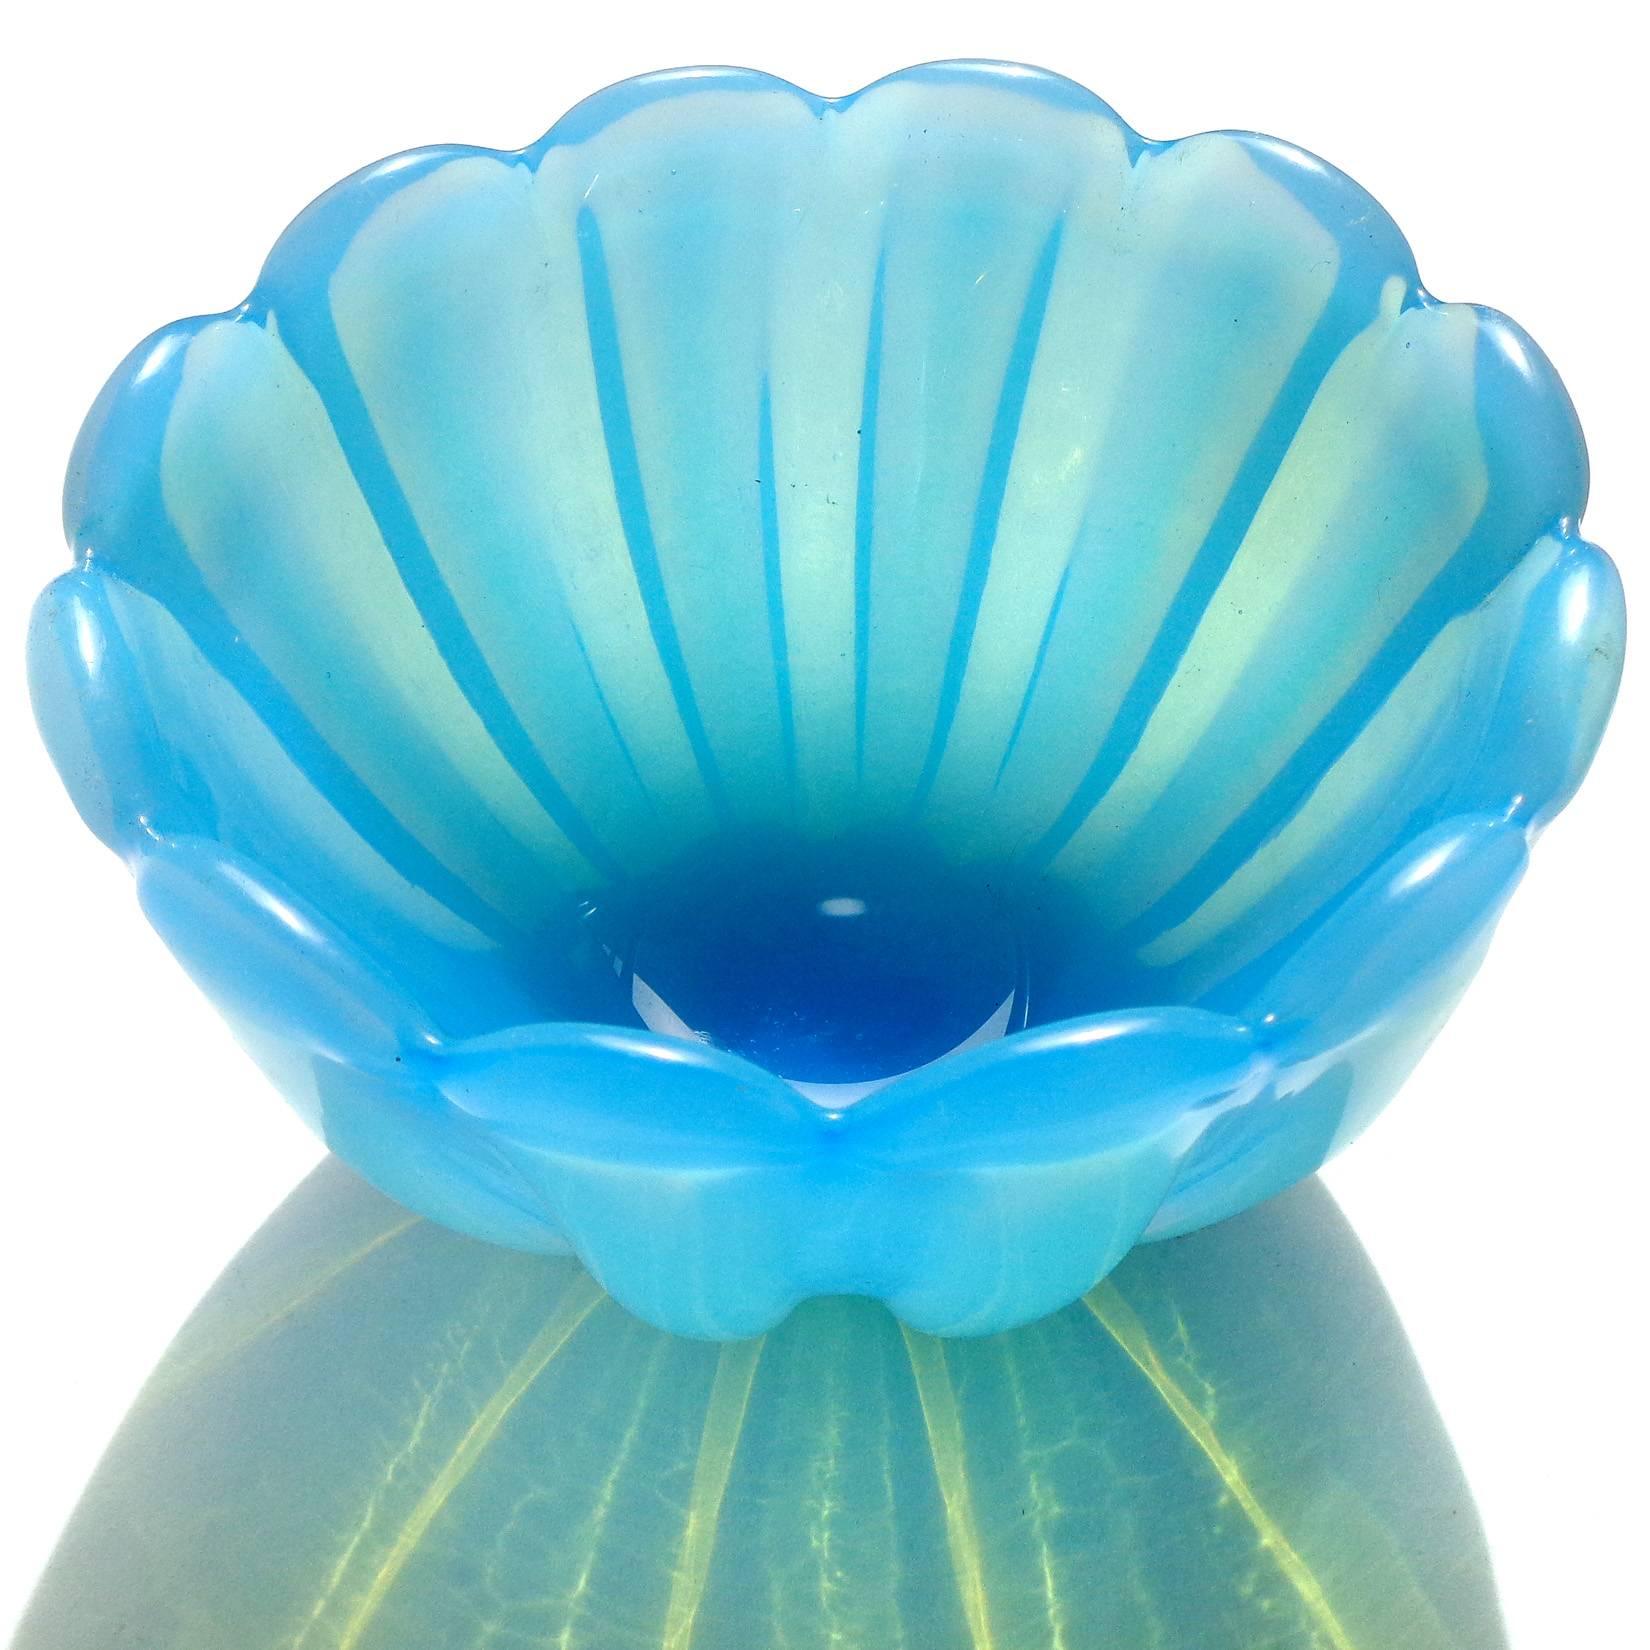 FREE Shipping Worldwide! See details below description.

Beautiful Murano hand blown opalescent blue and white art glass bowl. Documented to the Fratelli Toso company. Has a scalloped rim and is very deep, perfect for candy. 

Please look at my